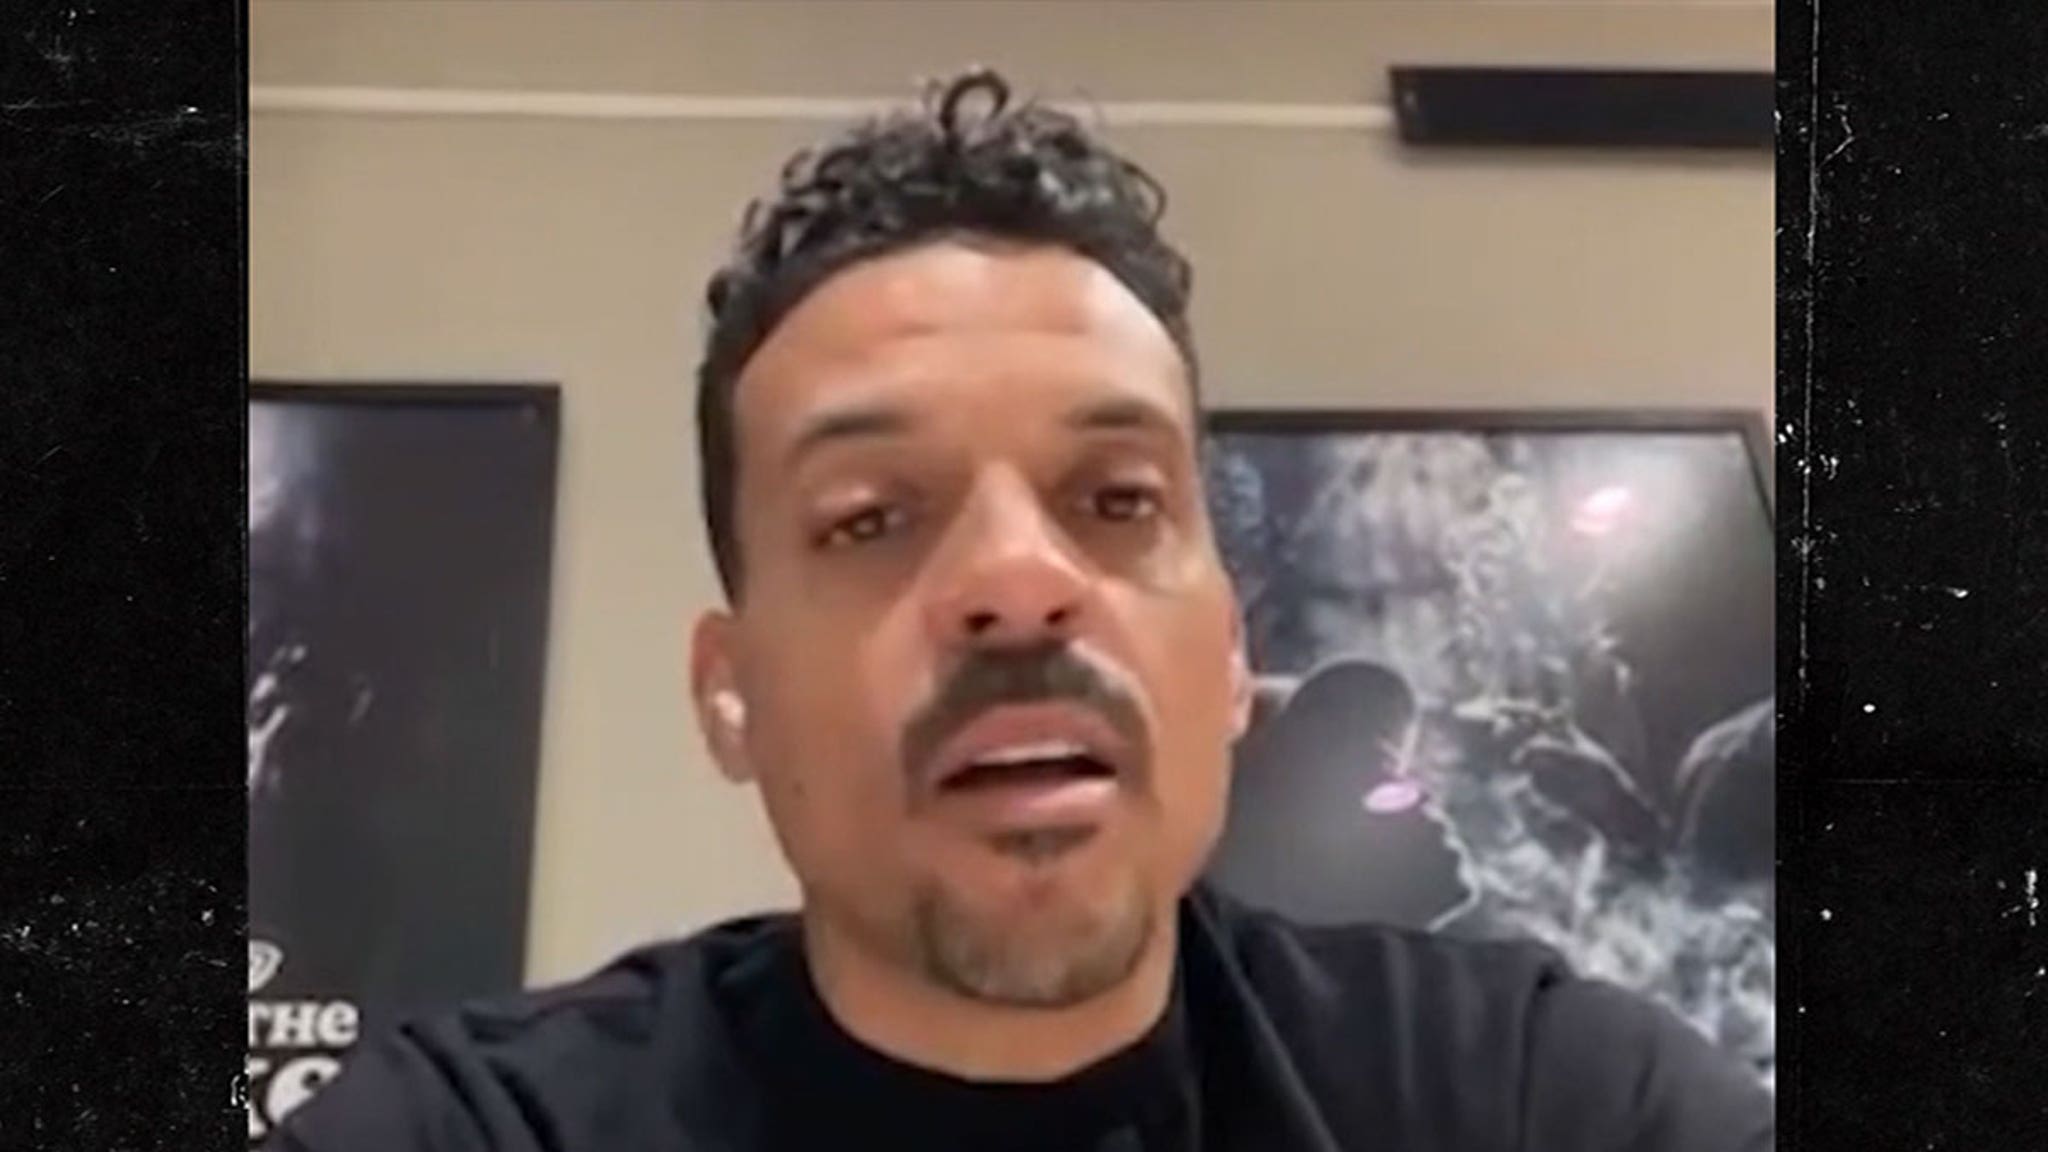 Matt Barnes is interested in politics and hopes to get a job at 50